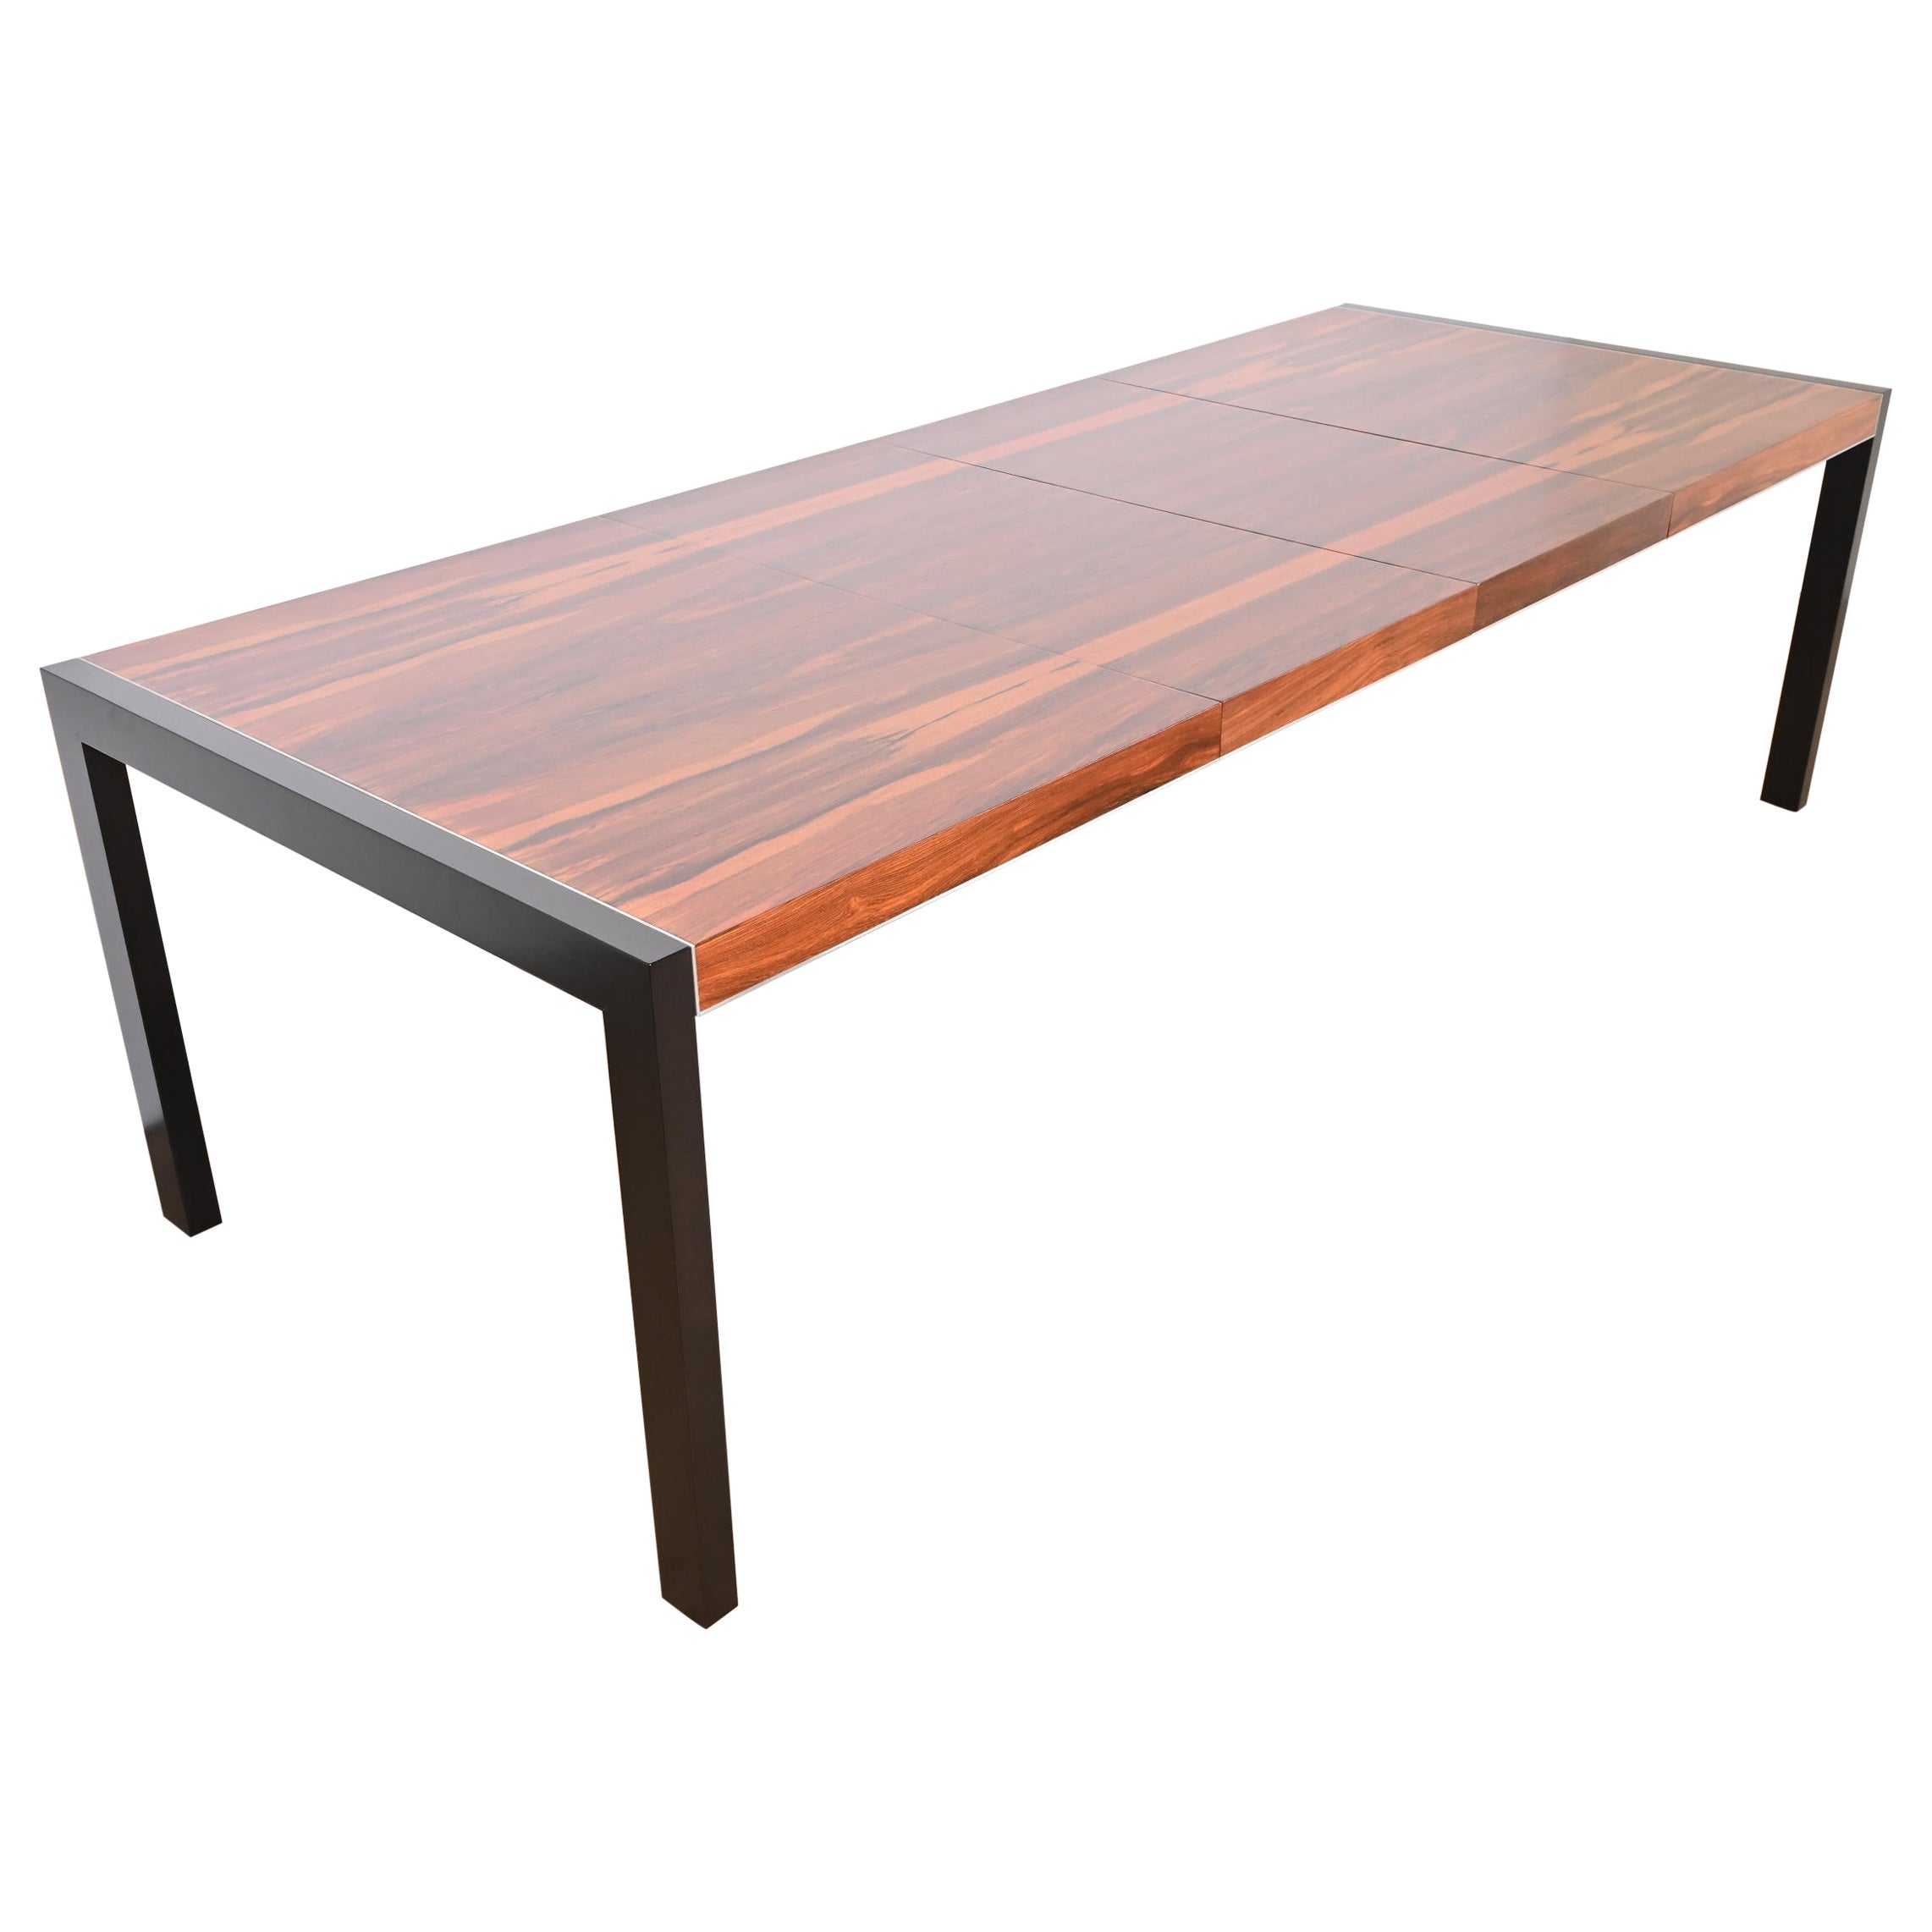 Robert Baron for Glenn of California Rosewood Parsons Dining Table, Refinished